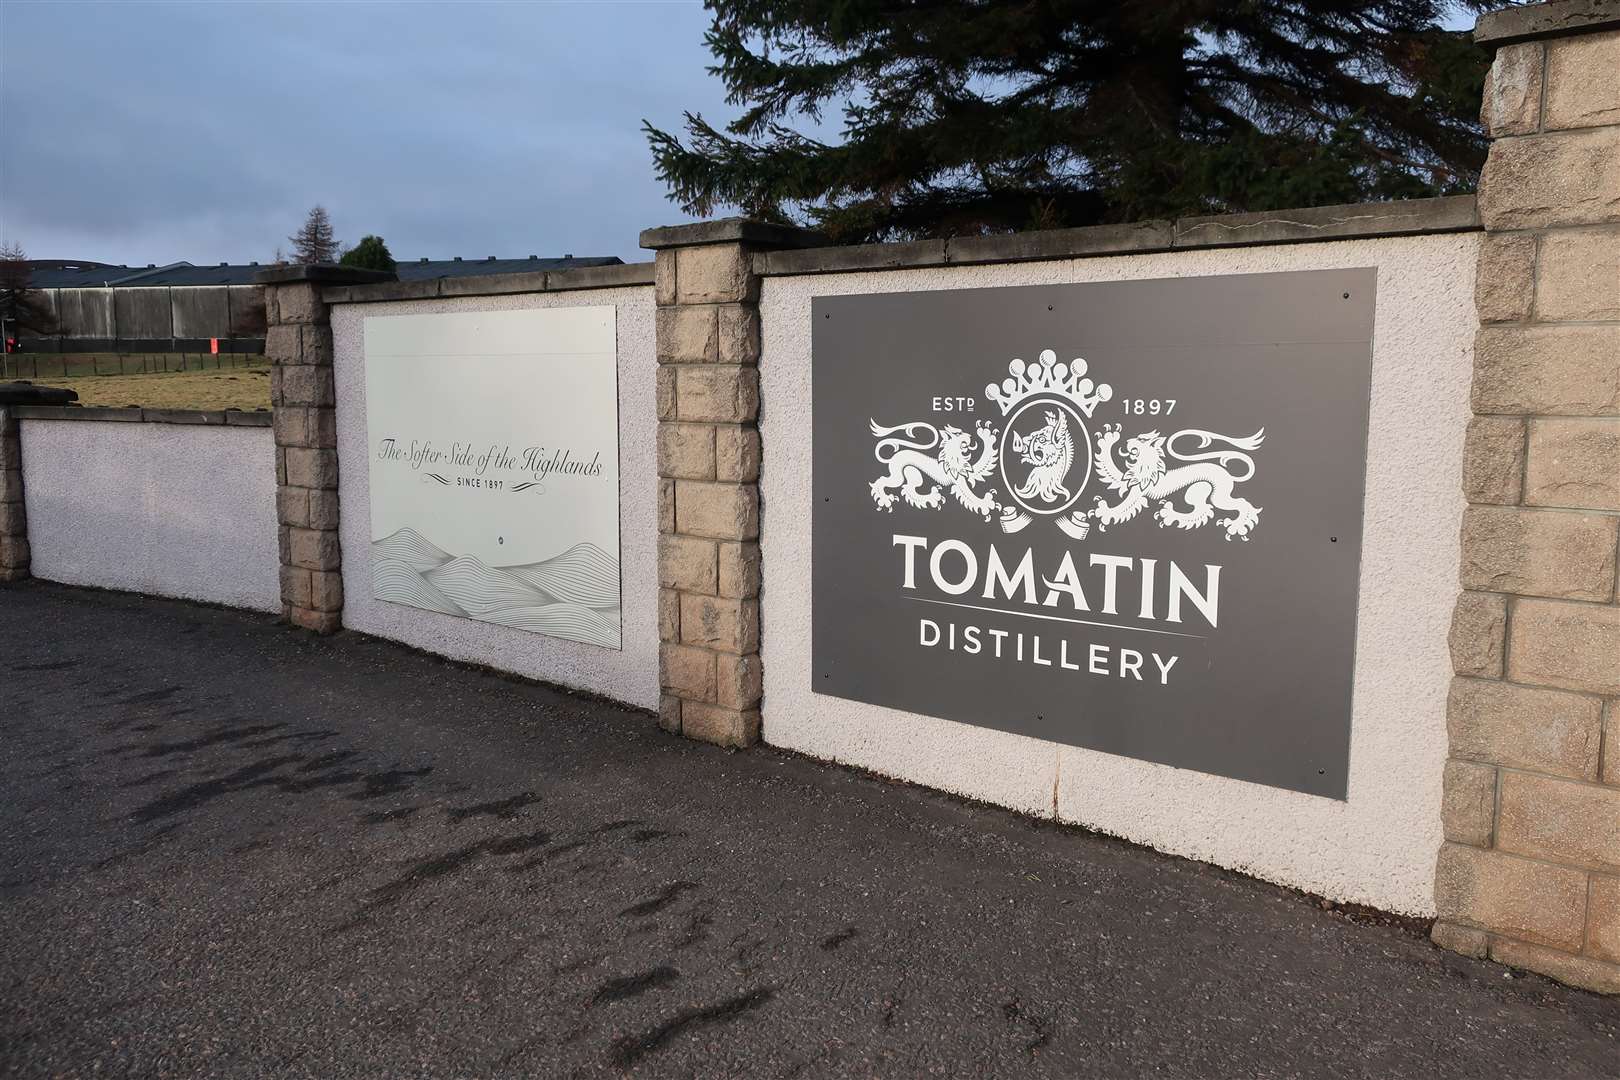 Tomatin Distillery turned an online whisky festival into a charity fundraiser.